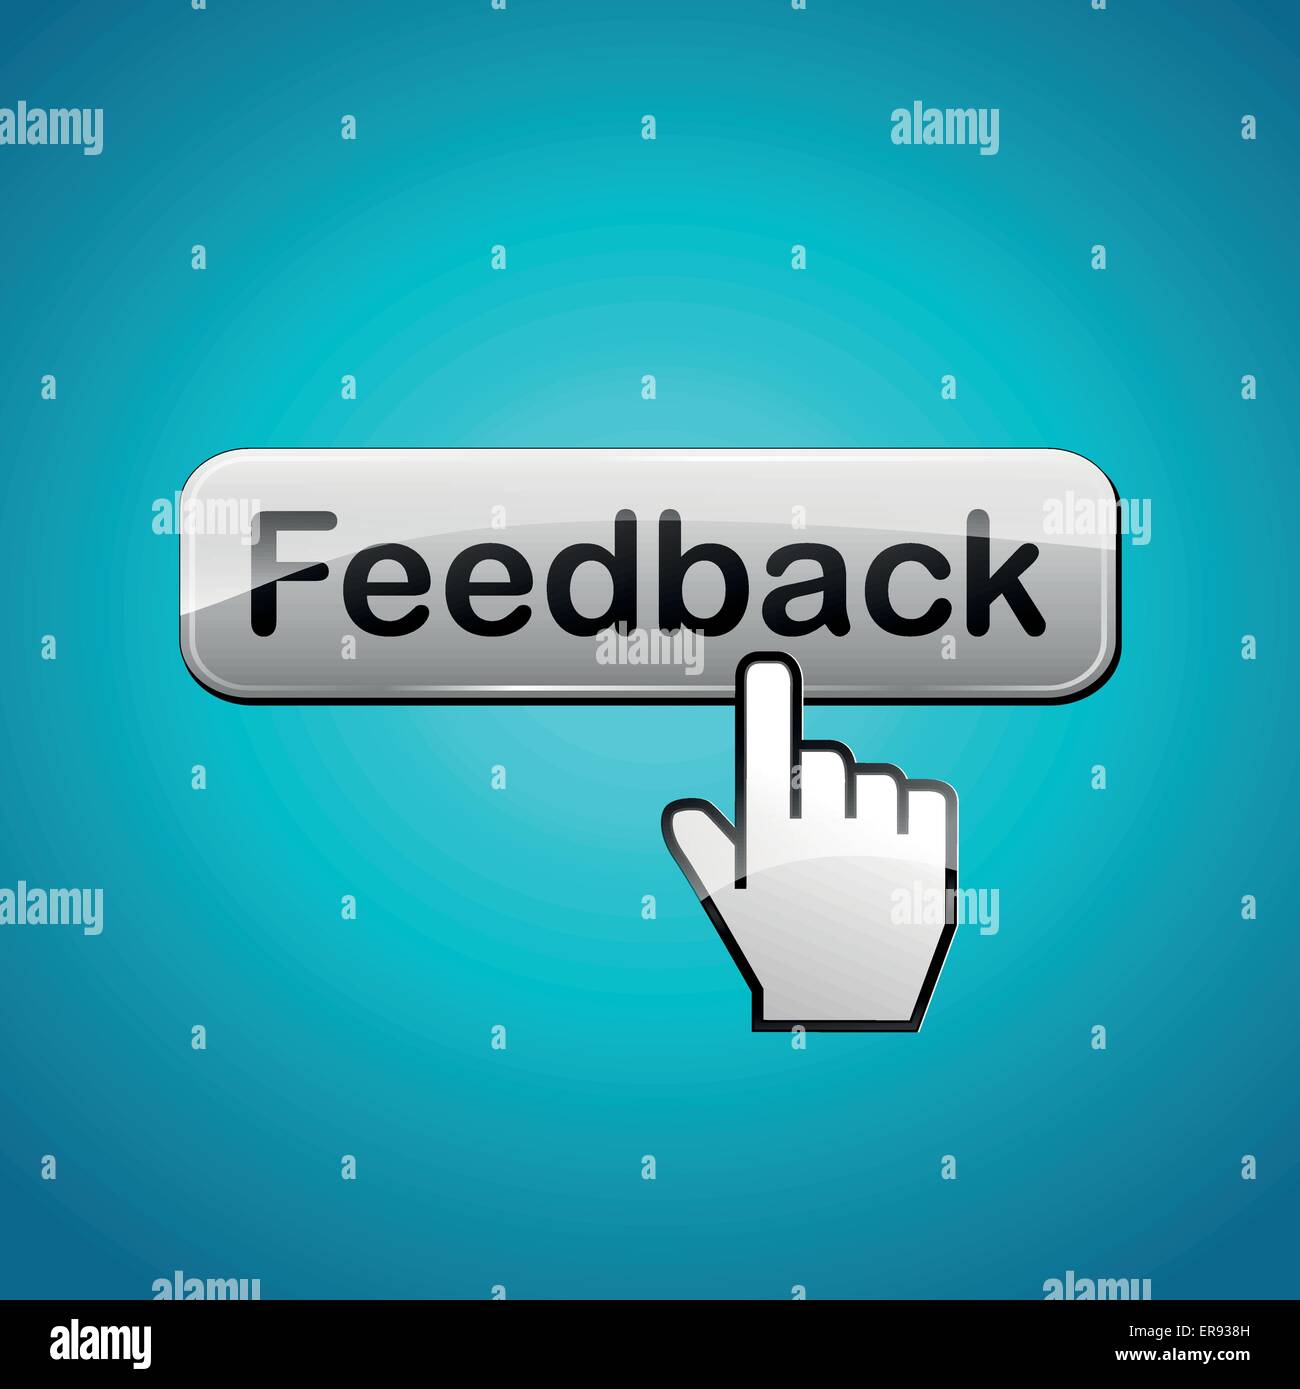 Vector illustration of feedback abstract concept background Stock Vector